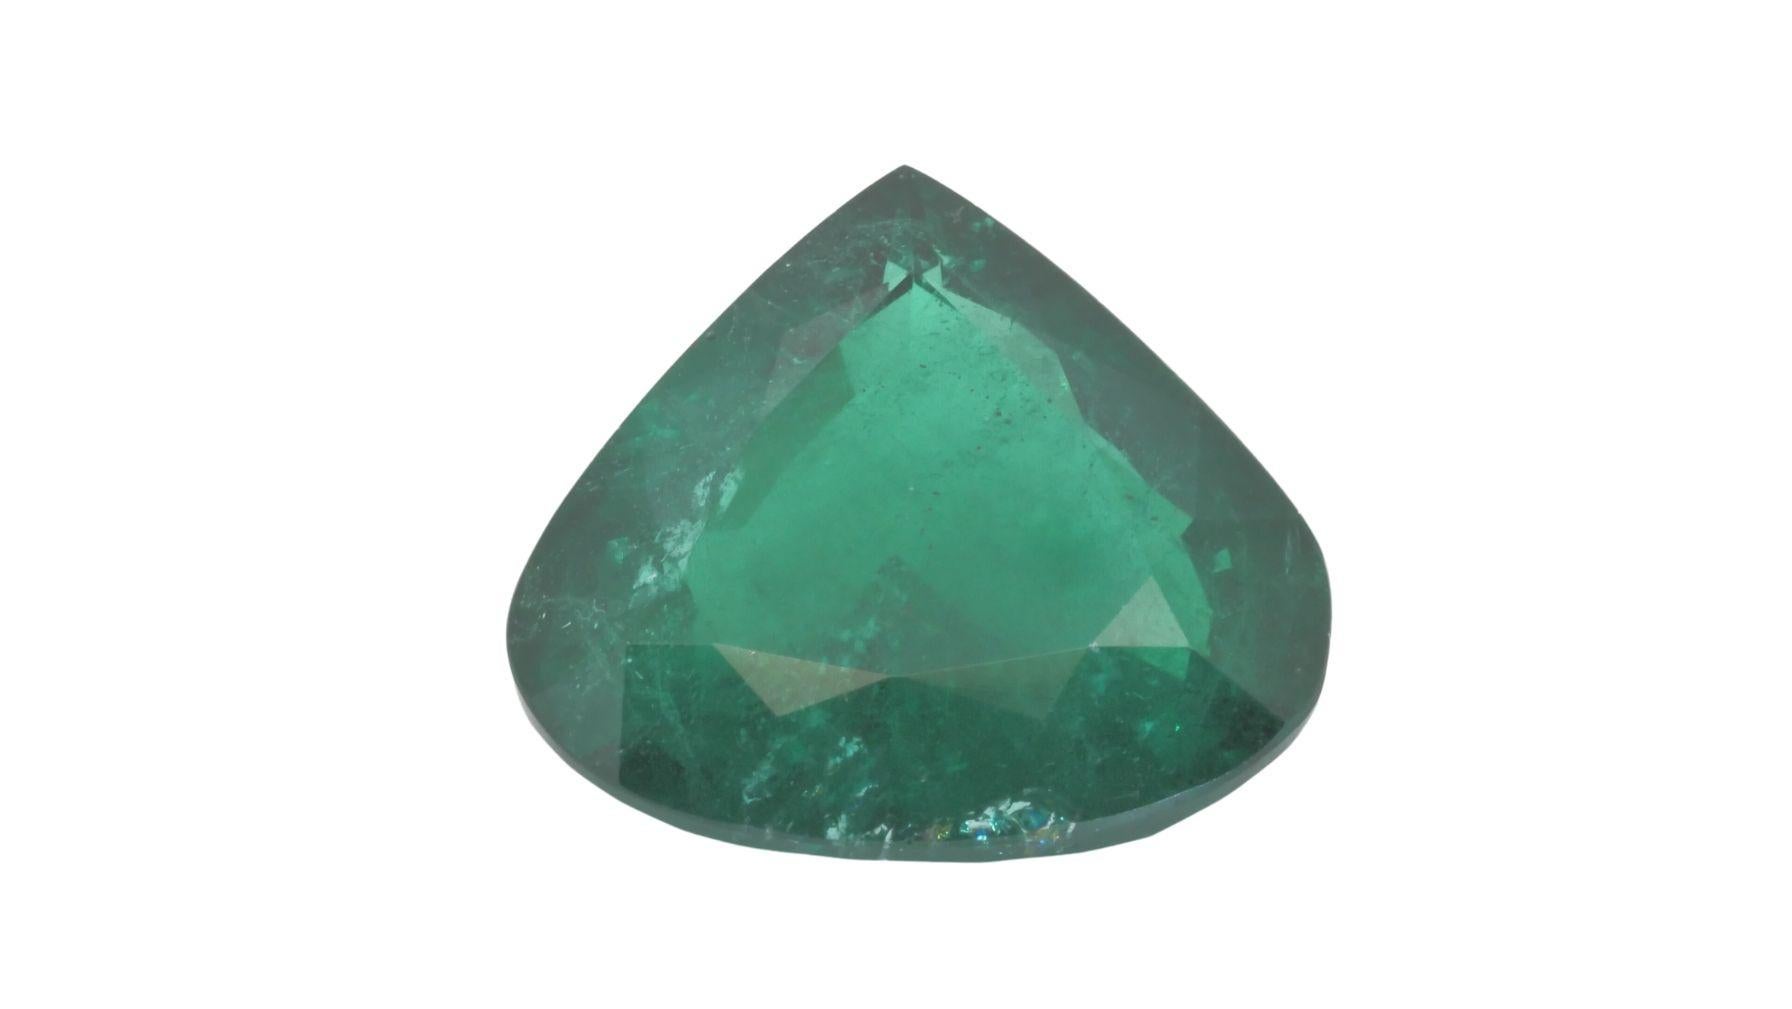 One splendid pear cut natural emerald in a 20.87 carat vivid green. This Gem comes with a GRS Certificate and laser inscription number.

SKU: dspv-180454
GRS GRS2023-028169